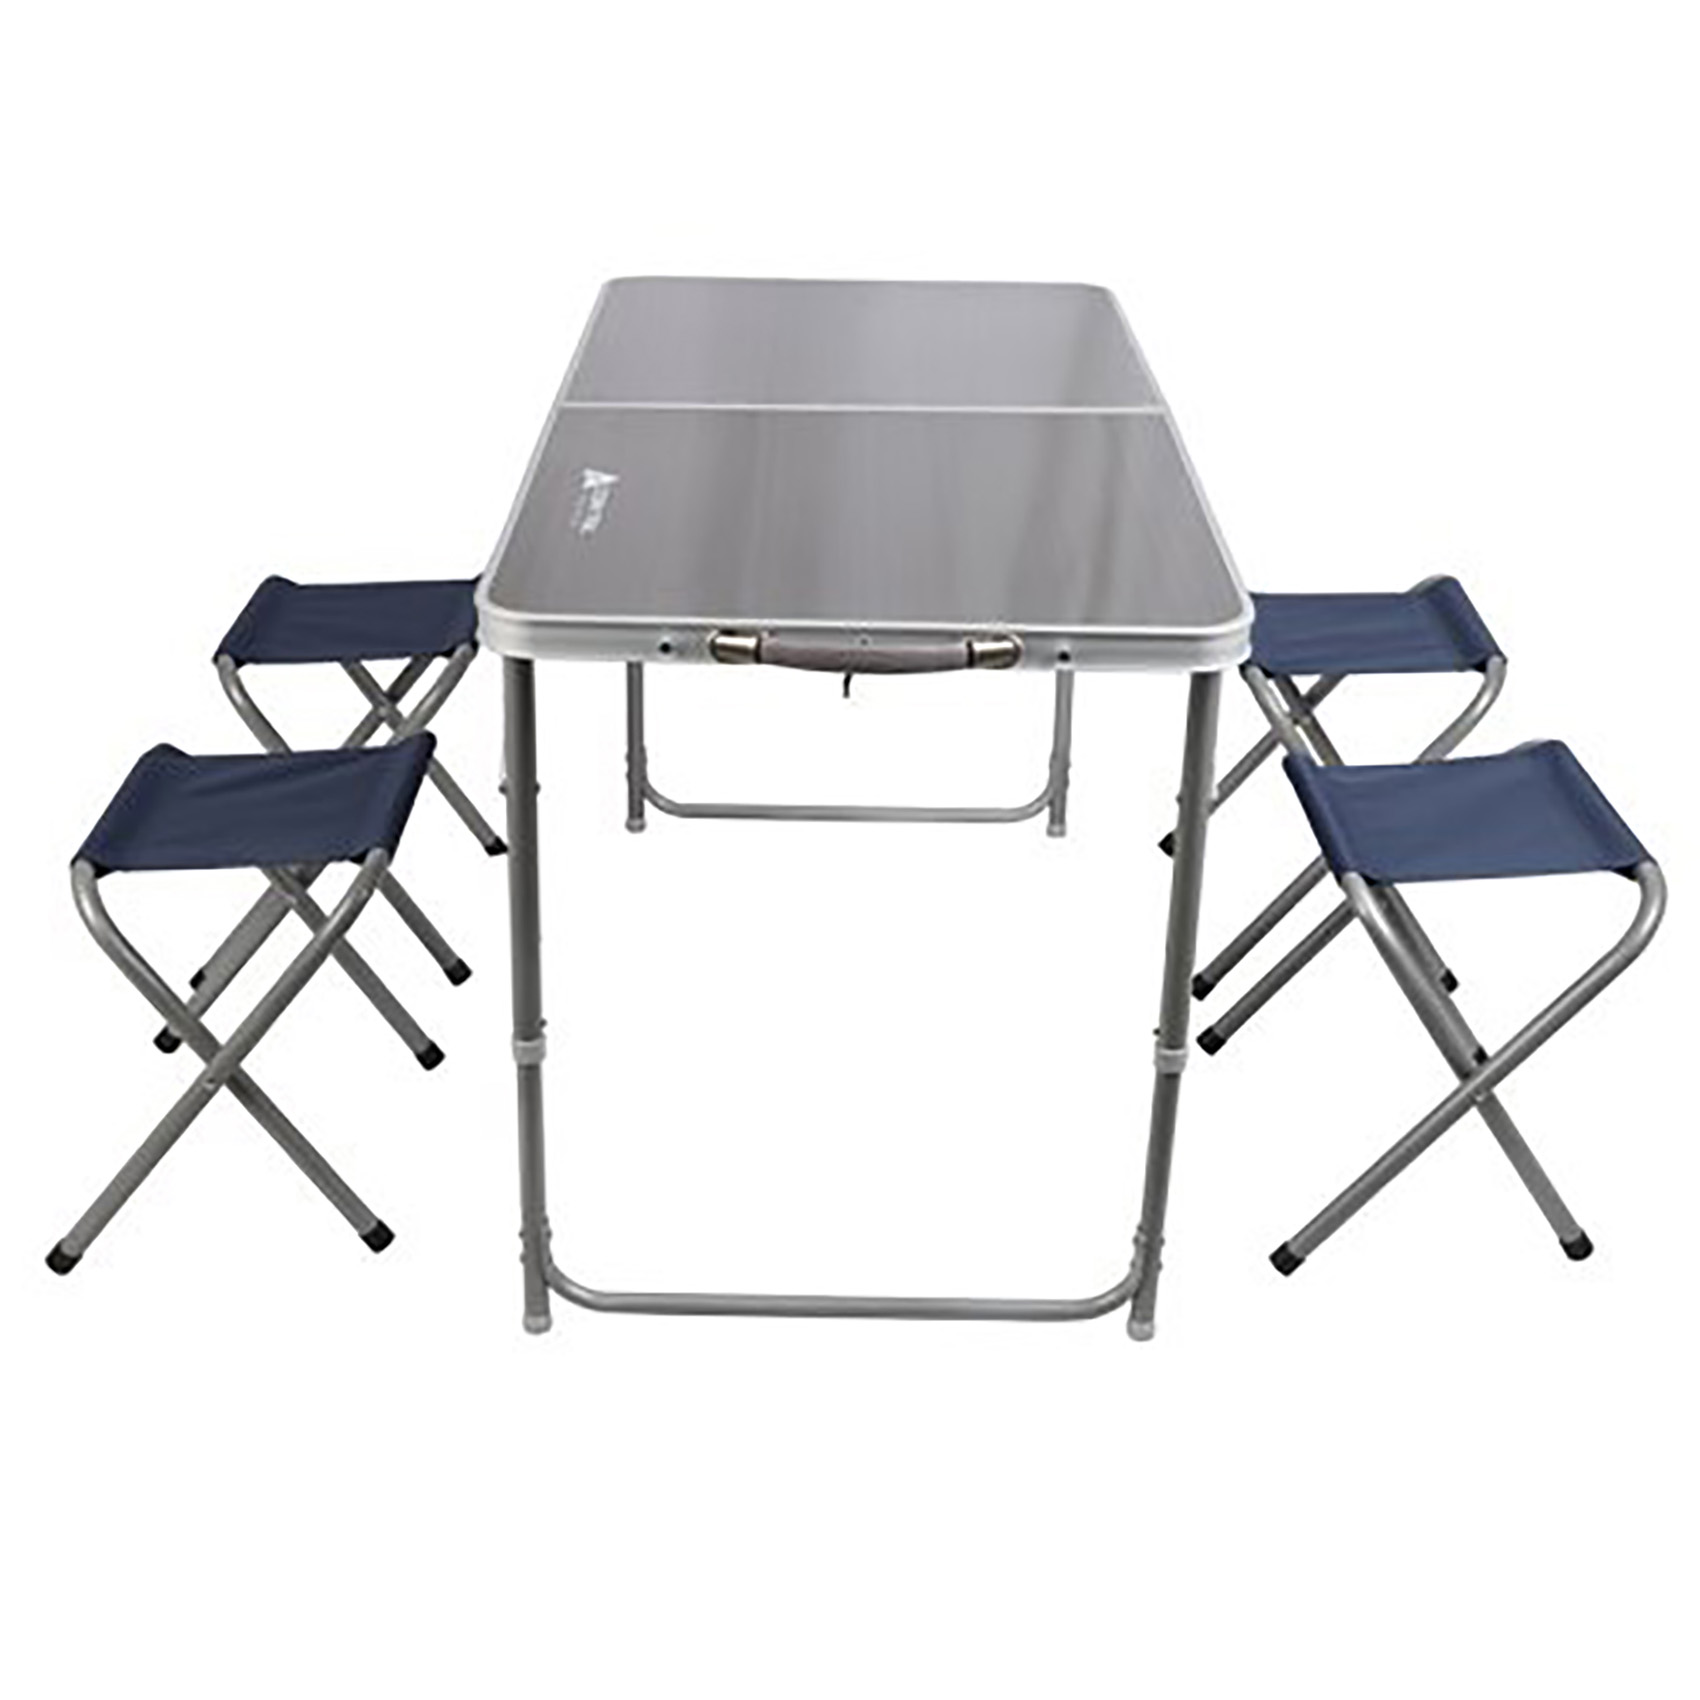 CAMPMATE ALUMINIUM FOLDABLE TABLE WITH 4PCS CHAIR TABLE-120X60X70CM CHAIR-28X32X36CM 4PCS MATERIAL- ALUMINIUM TUBE WITH 25-19*0.9MM+5MM MDF CM-18007 |CAMPING FURNITURE| CAMPING TABLE AND CHAIR | OUTDOOR